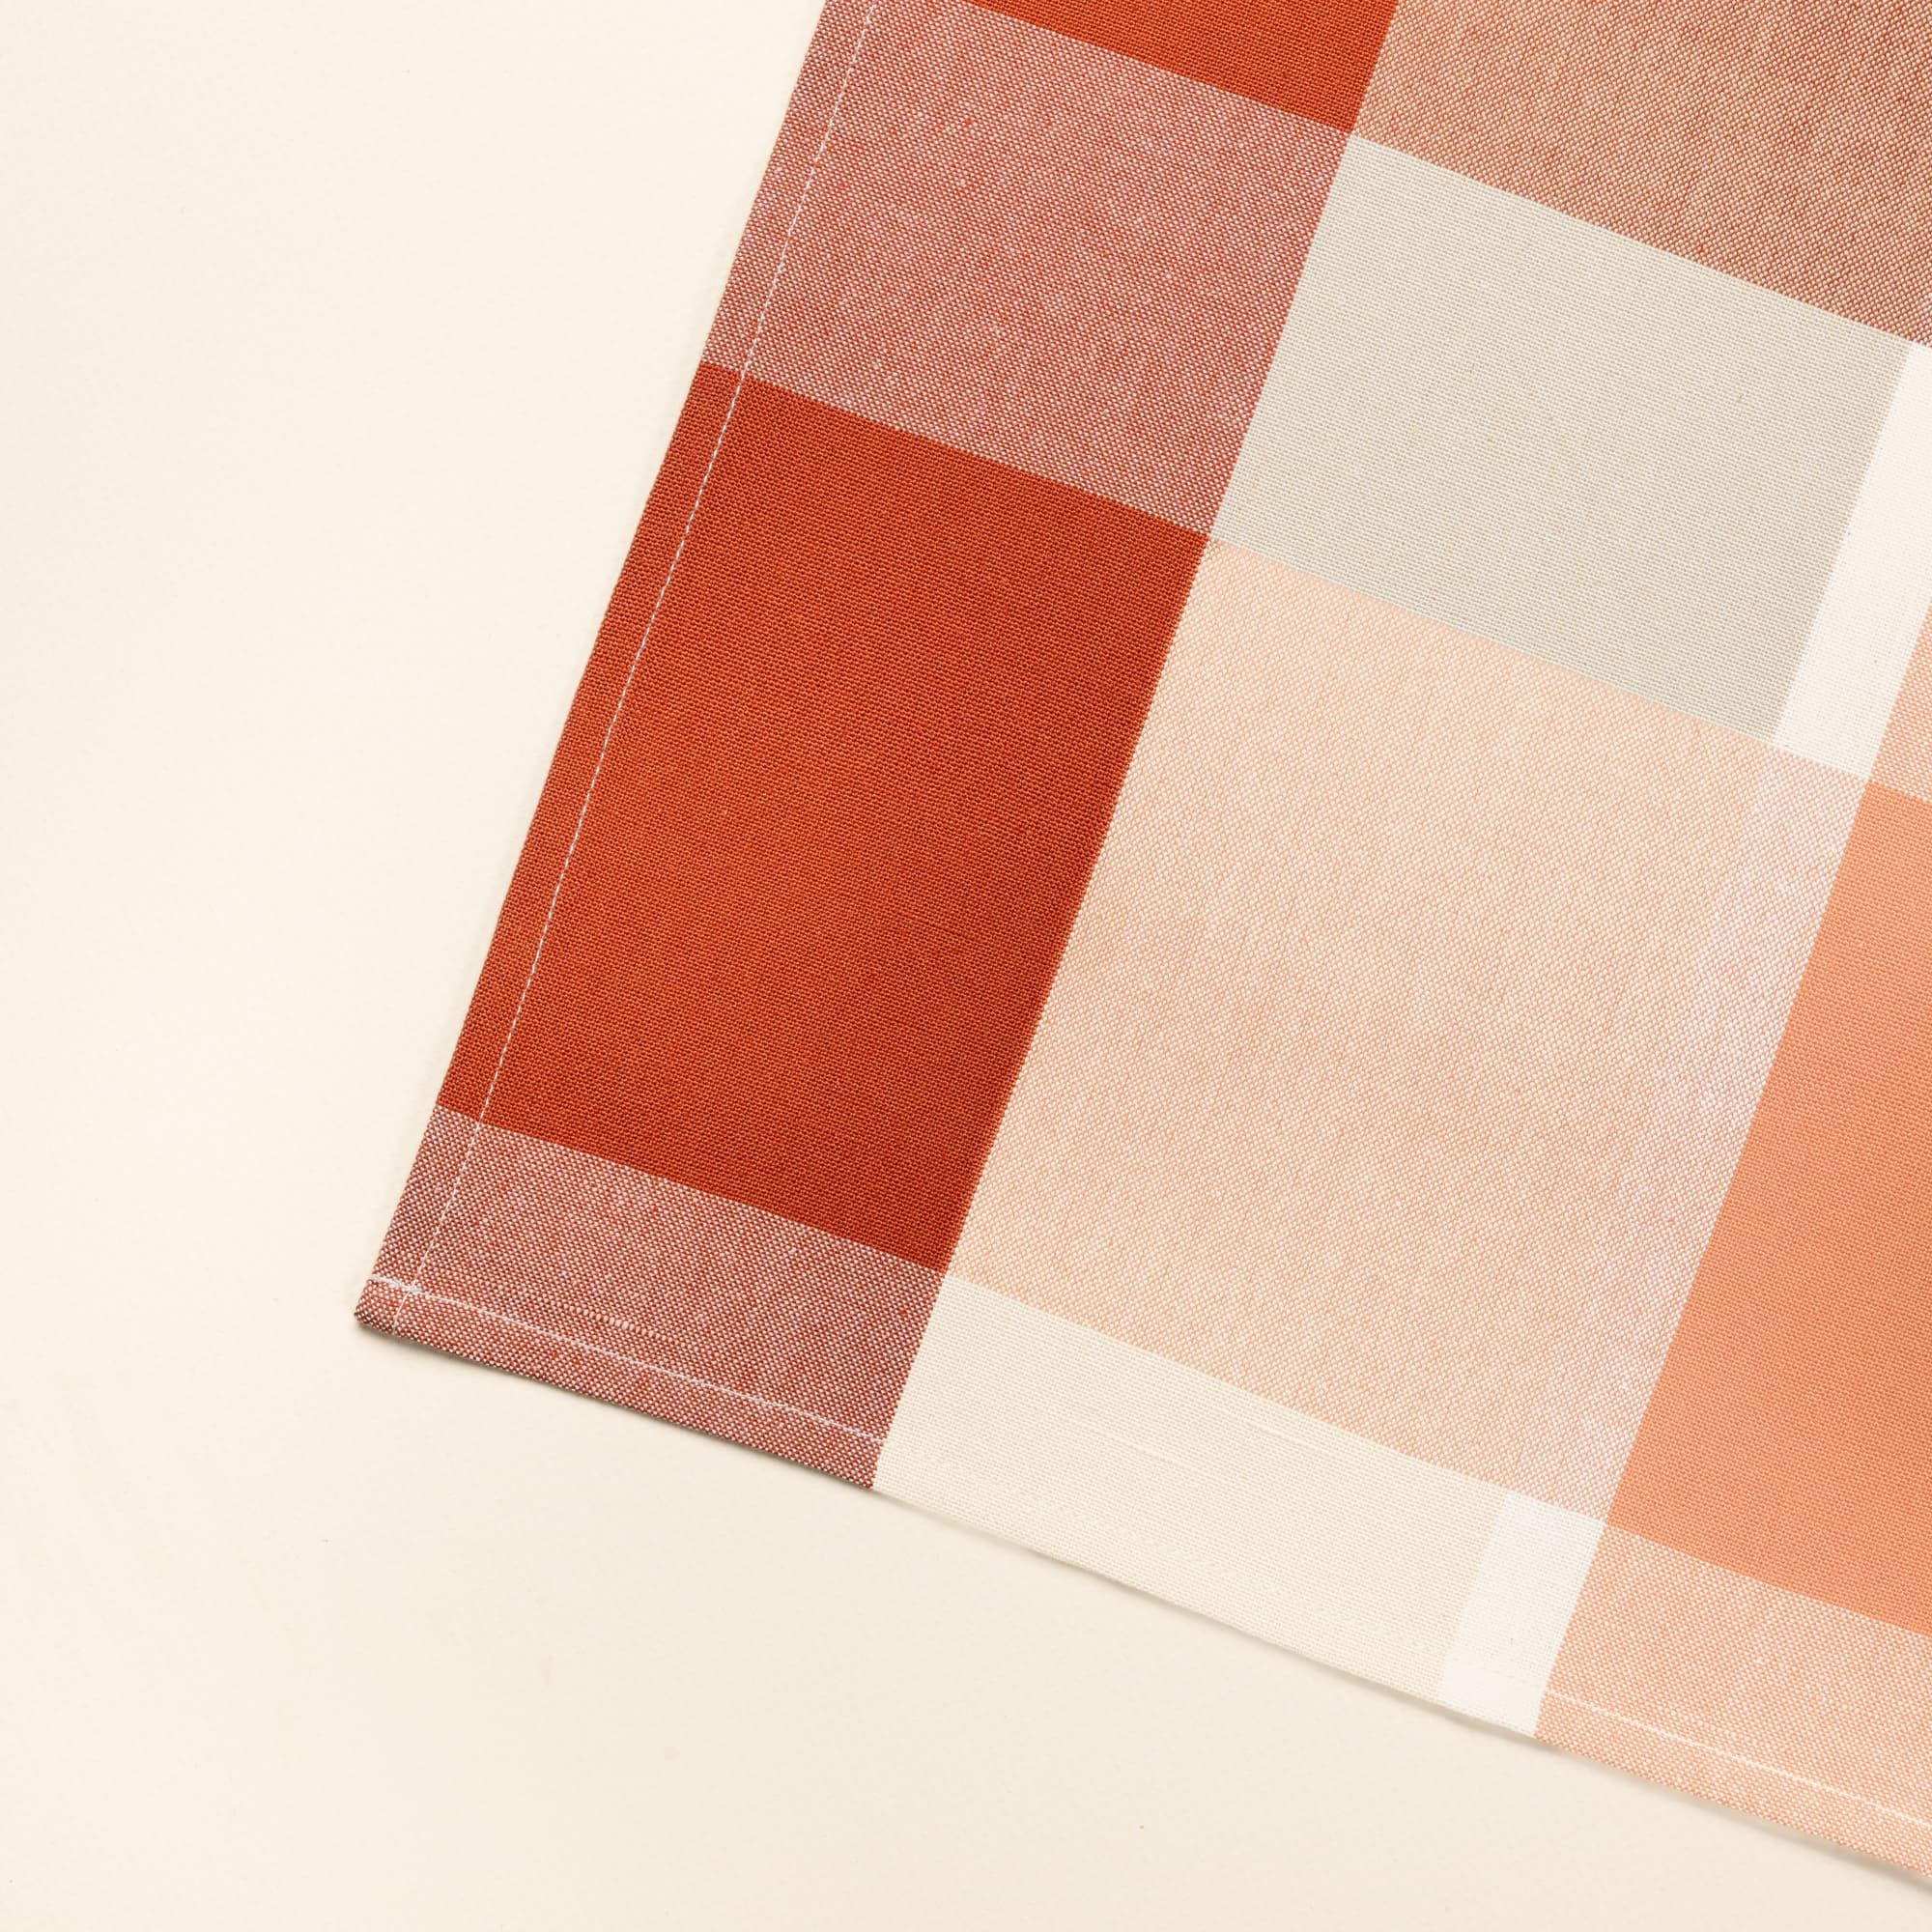 A close up of a corner of a flat square dinner napkin in a rust and cream gingham pattern.